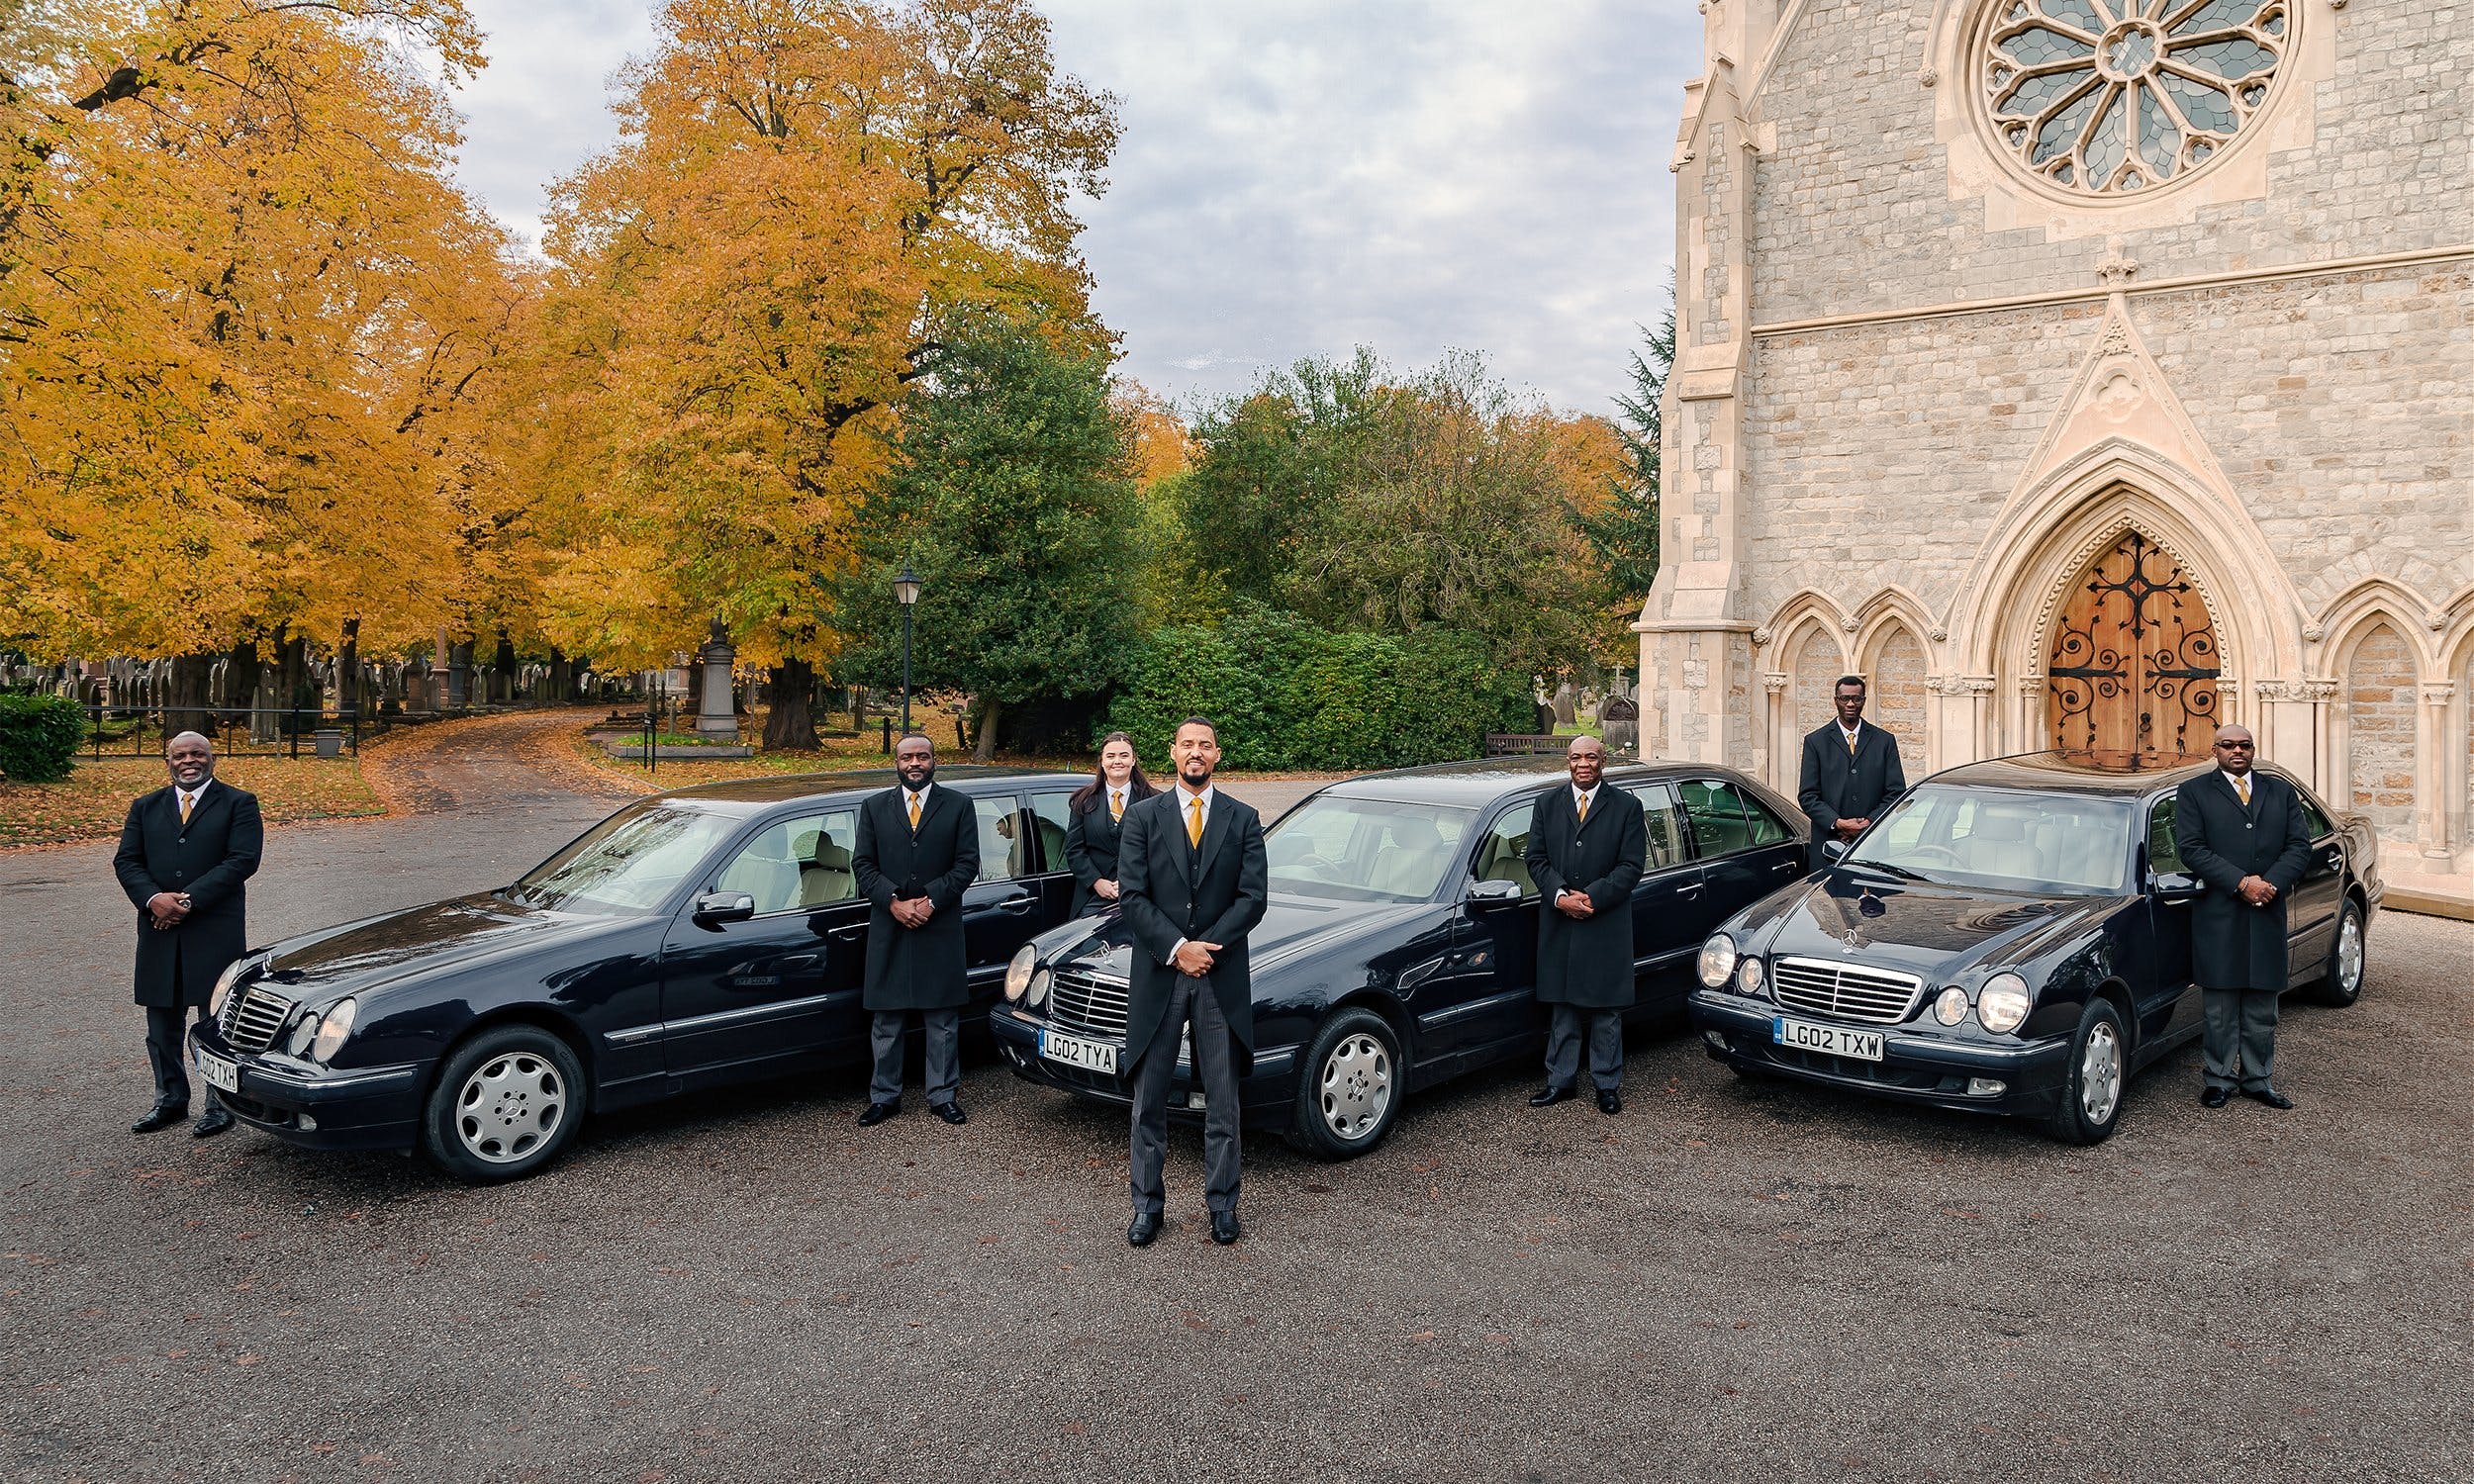 Hearse and Limousine with Pall Bearers